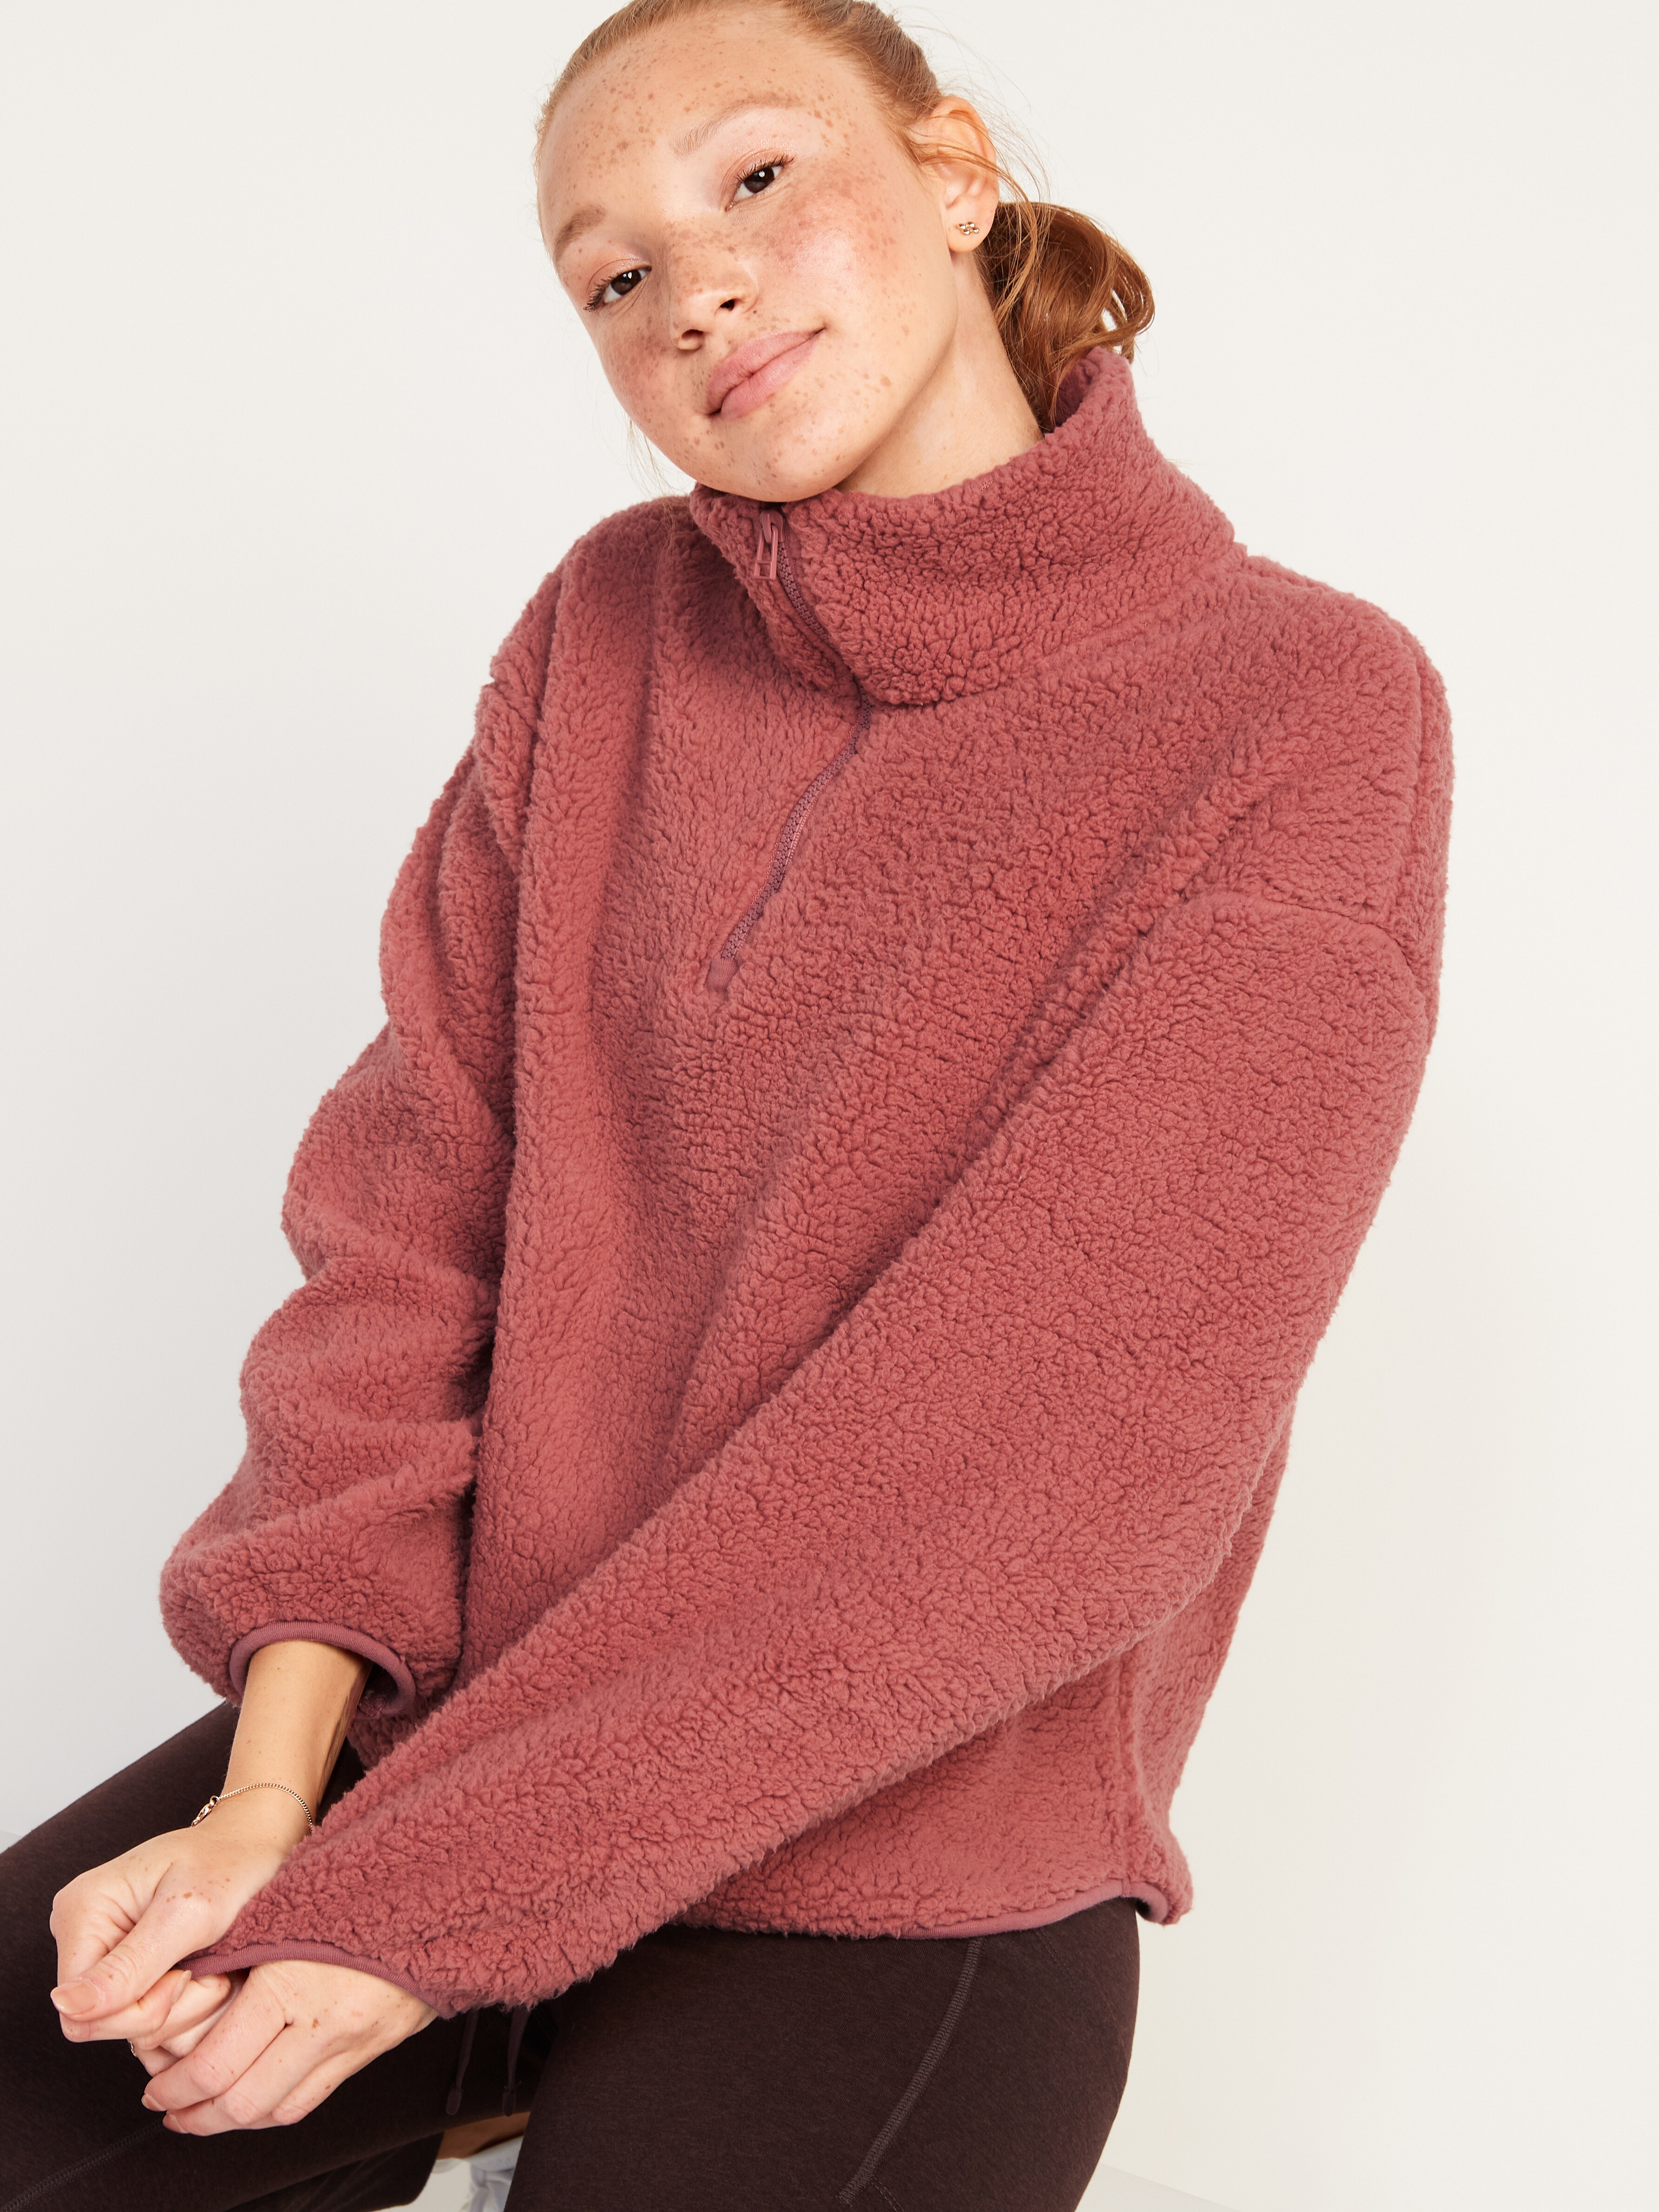 Cozy Sherpa Quarter-Zip Pullover Sweater for Women | Old Navy